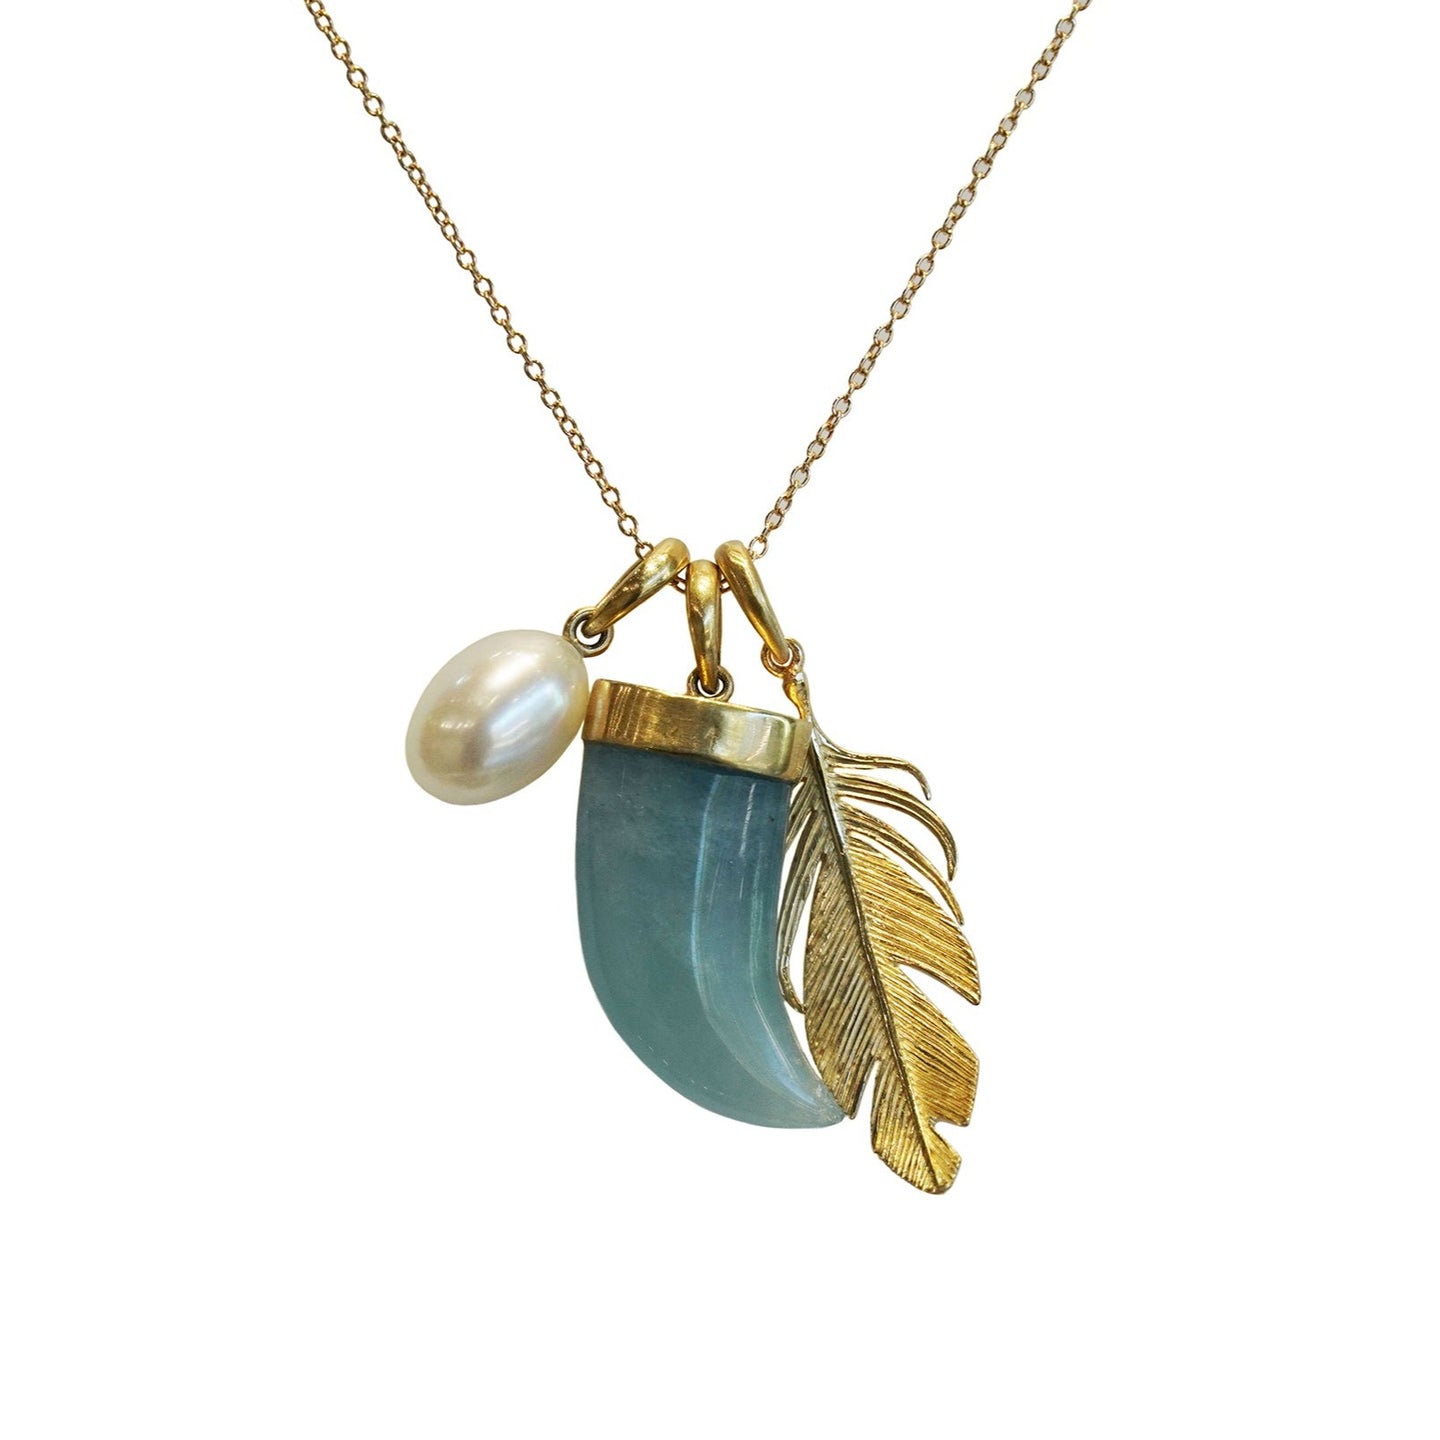 Aquamarine, Pearl and Feather Scavenger Necklace